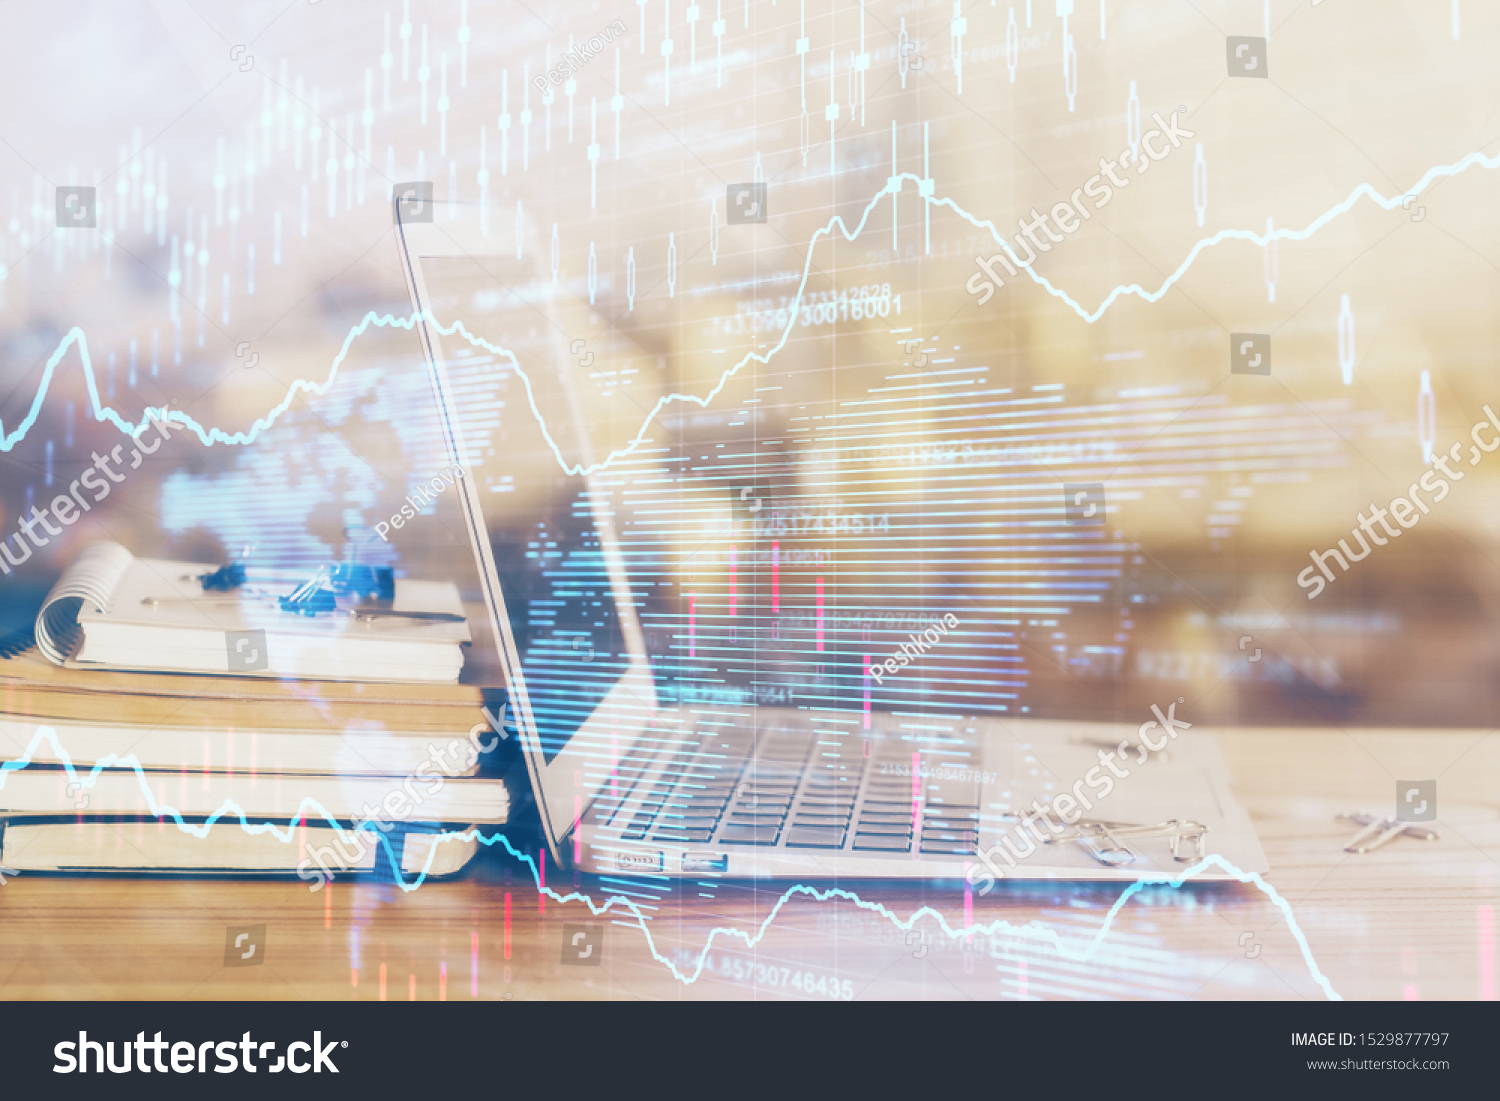 Stock market chart hologram drawn on personal computer background. Double exposure. Concept of investment. #1529877797